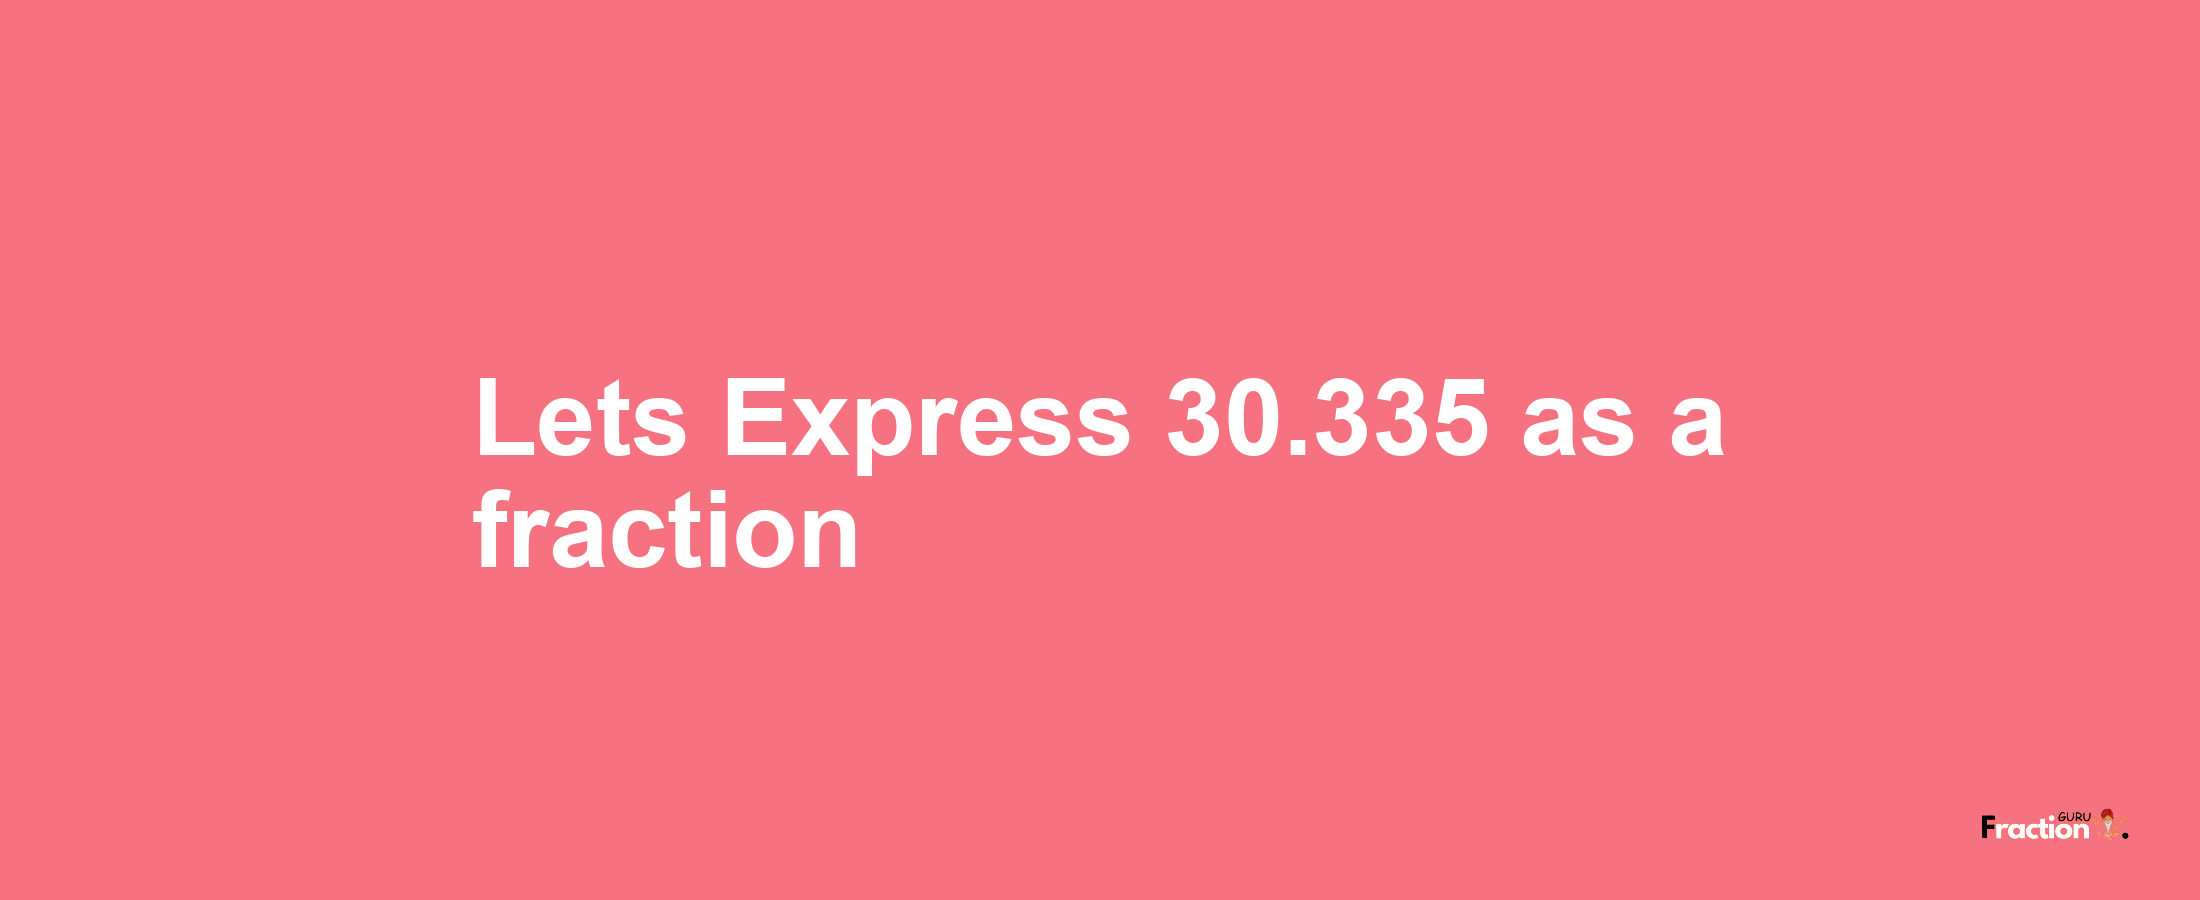 Lets Express 30.335 as afraction